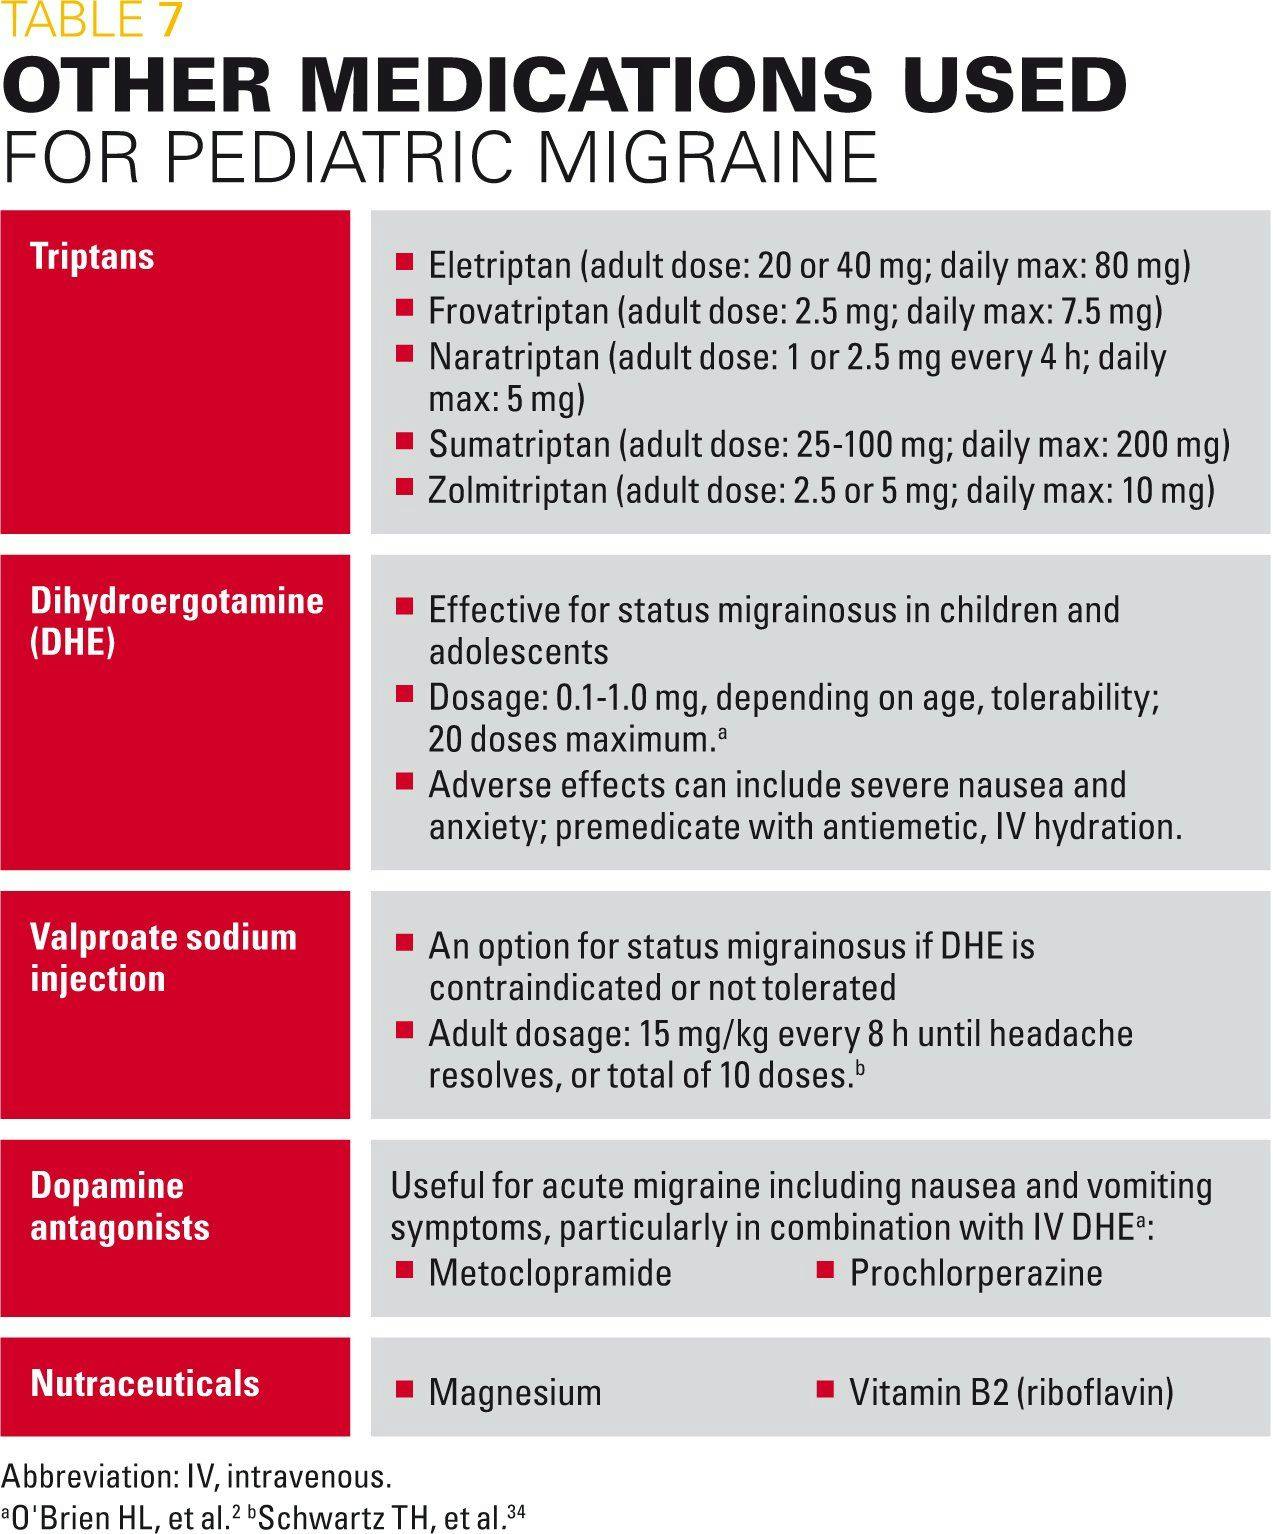 Table 7 Other medications used for pediatric migraines